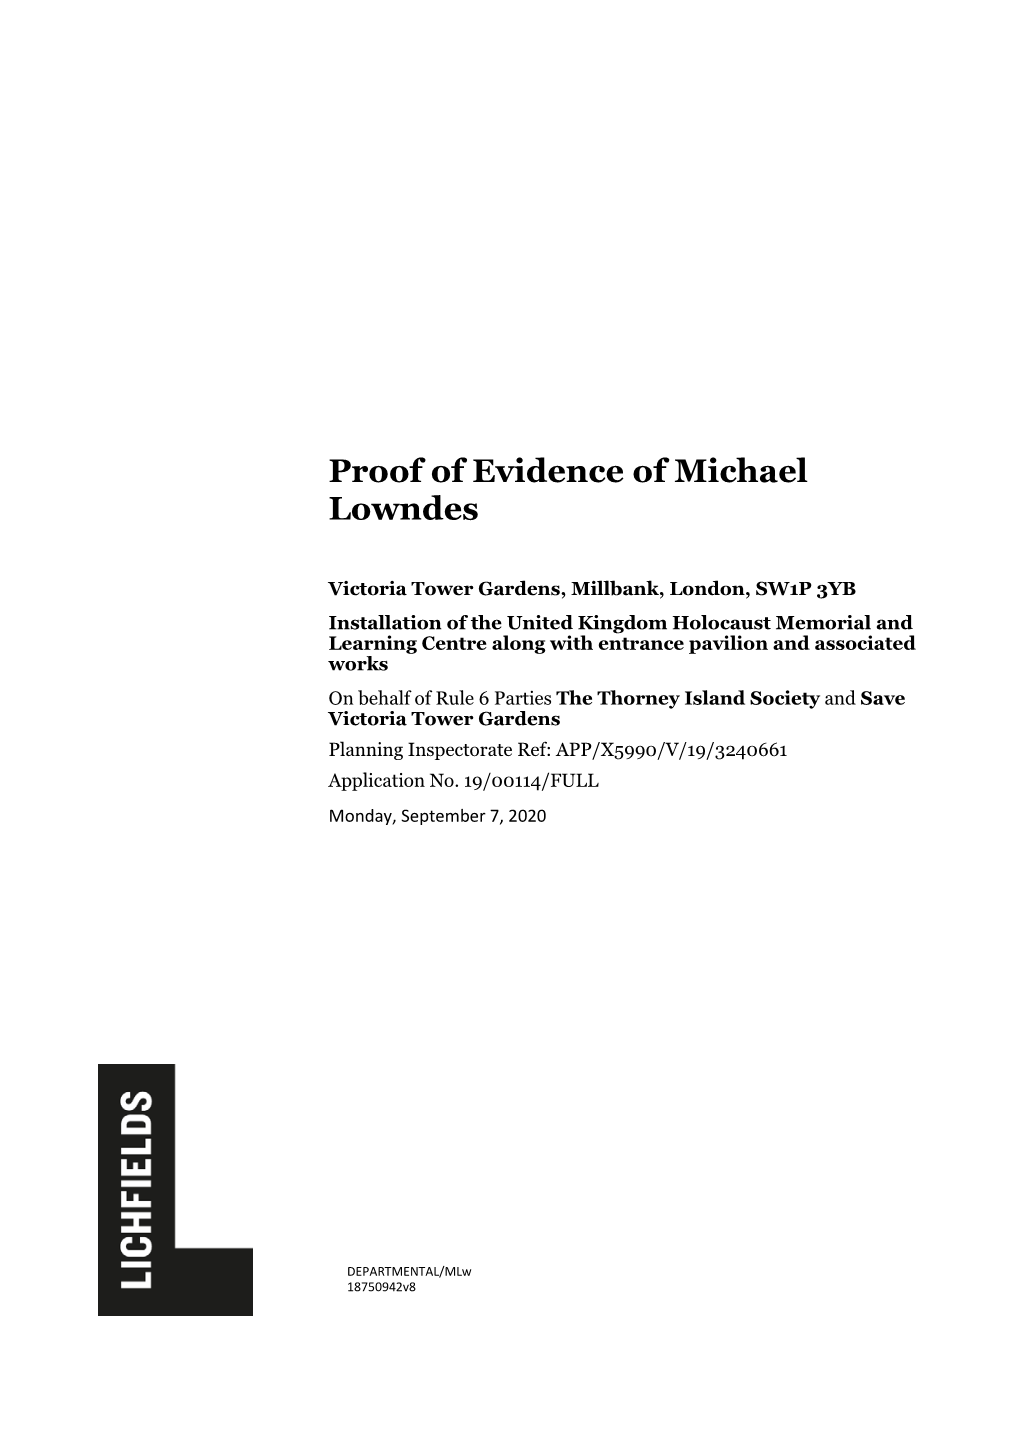 Proof of Evidence of Michael Lowndes